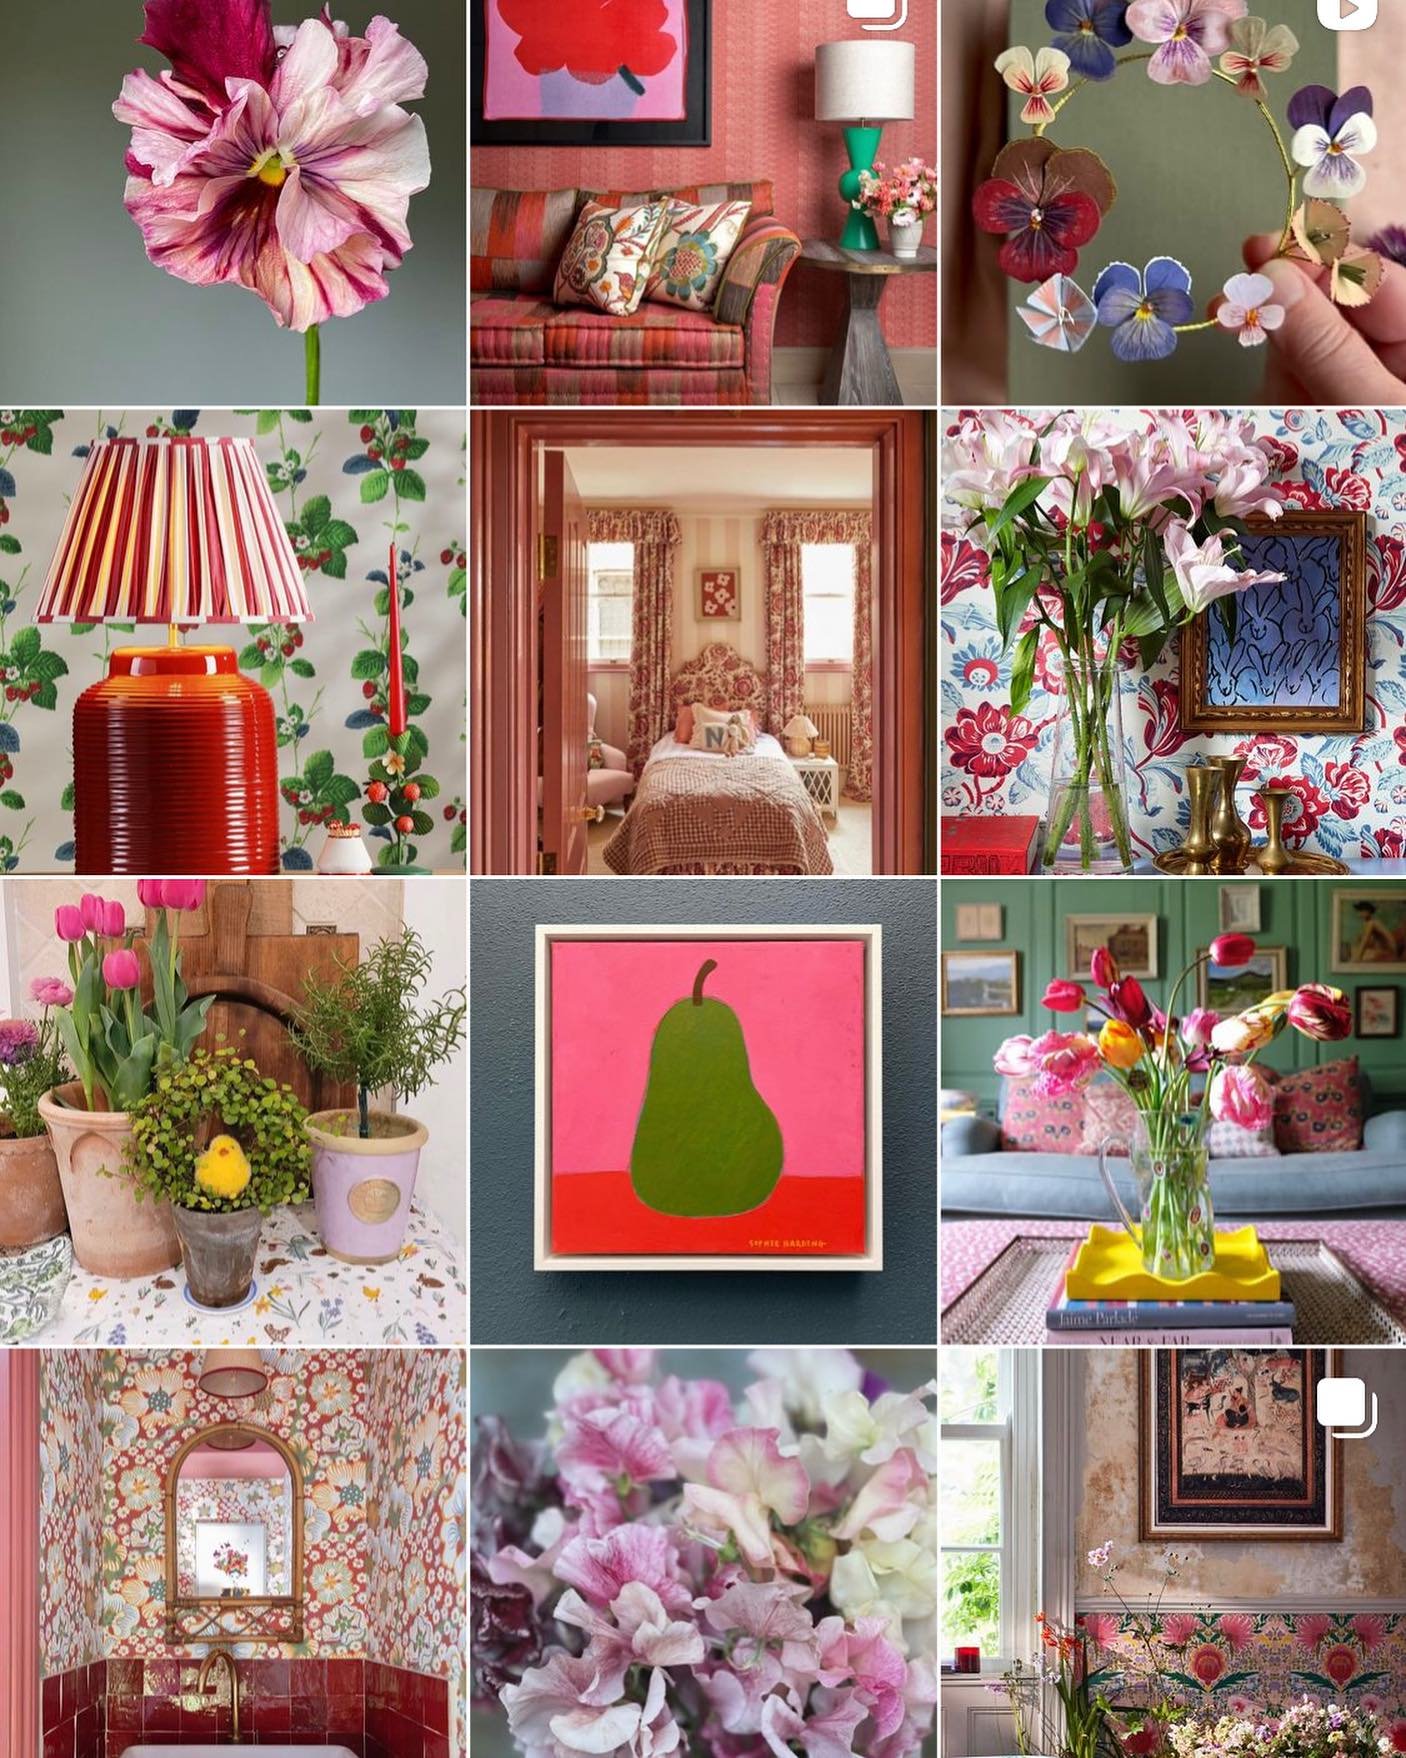 Happy #friendlyfriday after 3+weeks of Spring it finally feels like it around the Chalet! This week I&rsquo;m feeling the pull of pretty color and blooms! Please follow this to the originators feed - show these creatives lots of L&hearts;️VE with a d